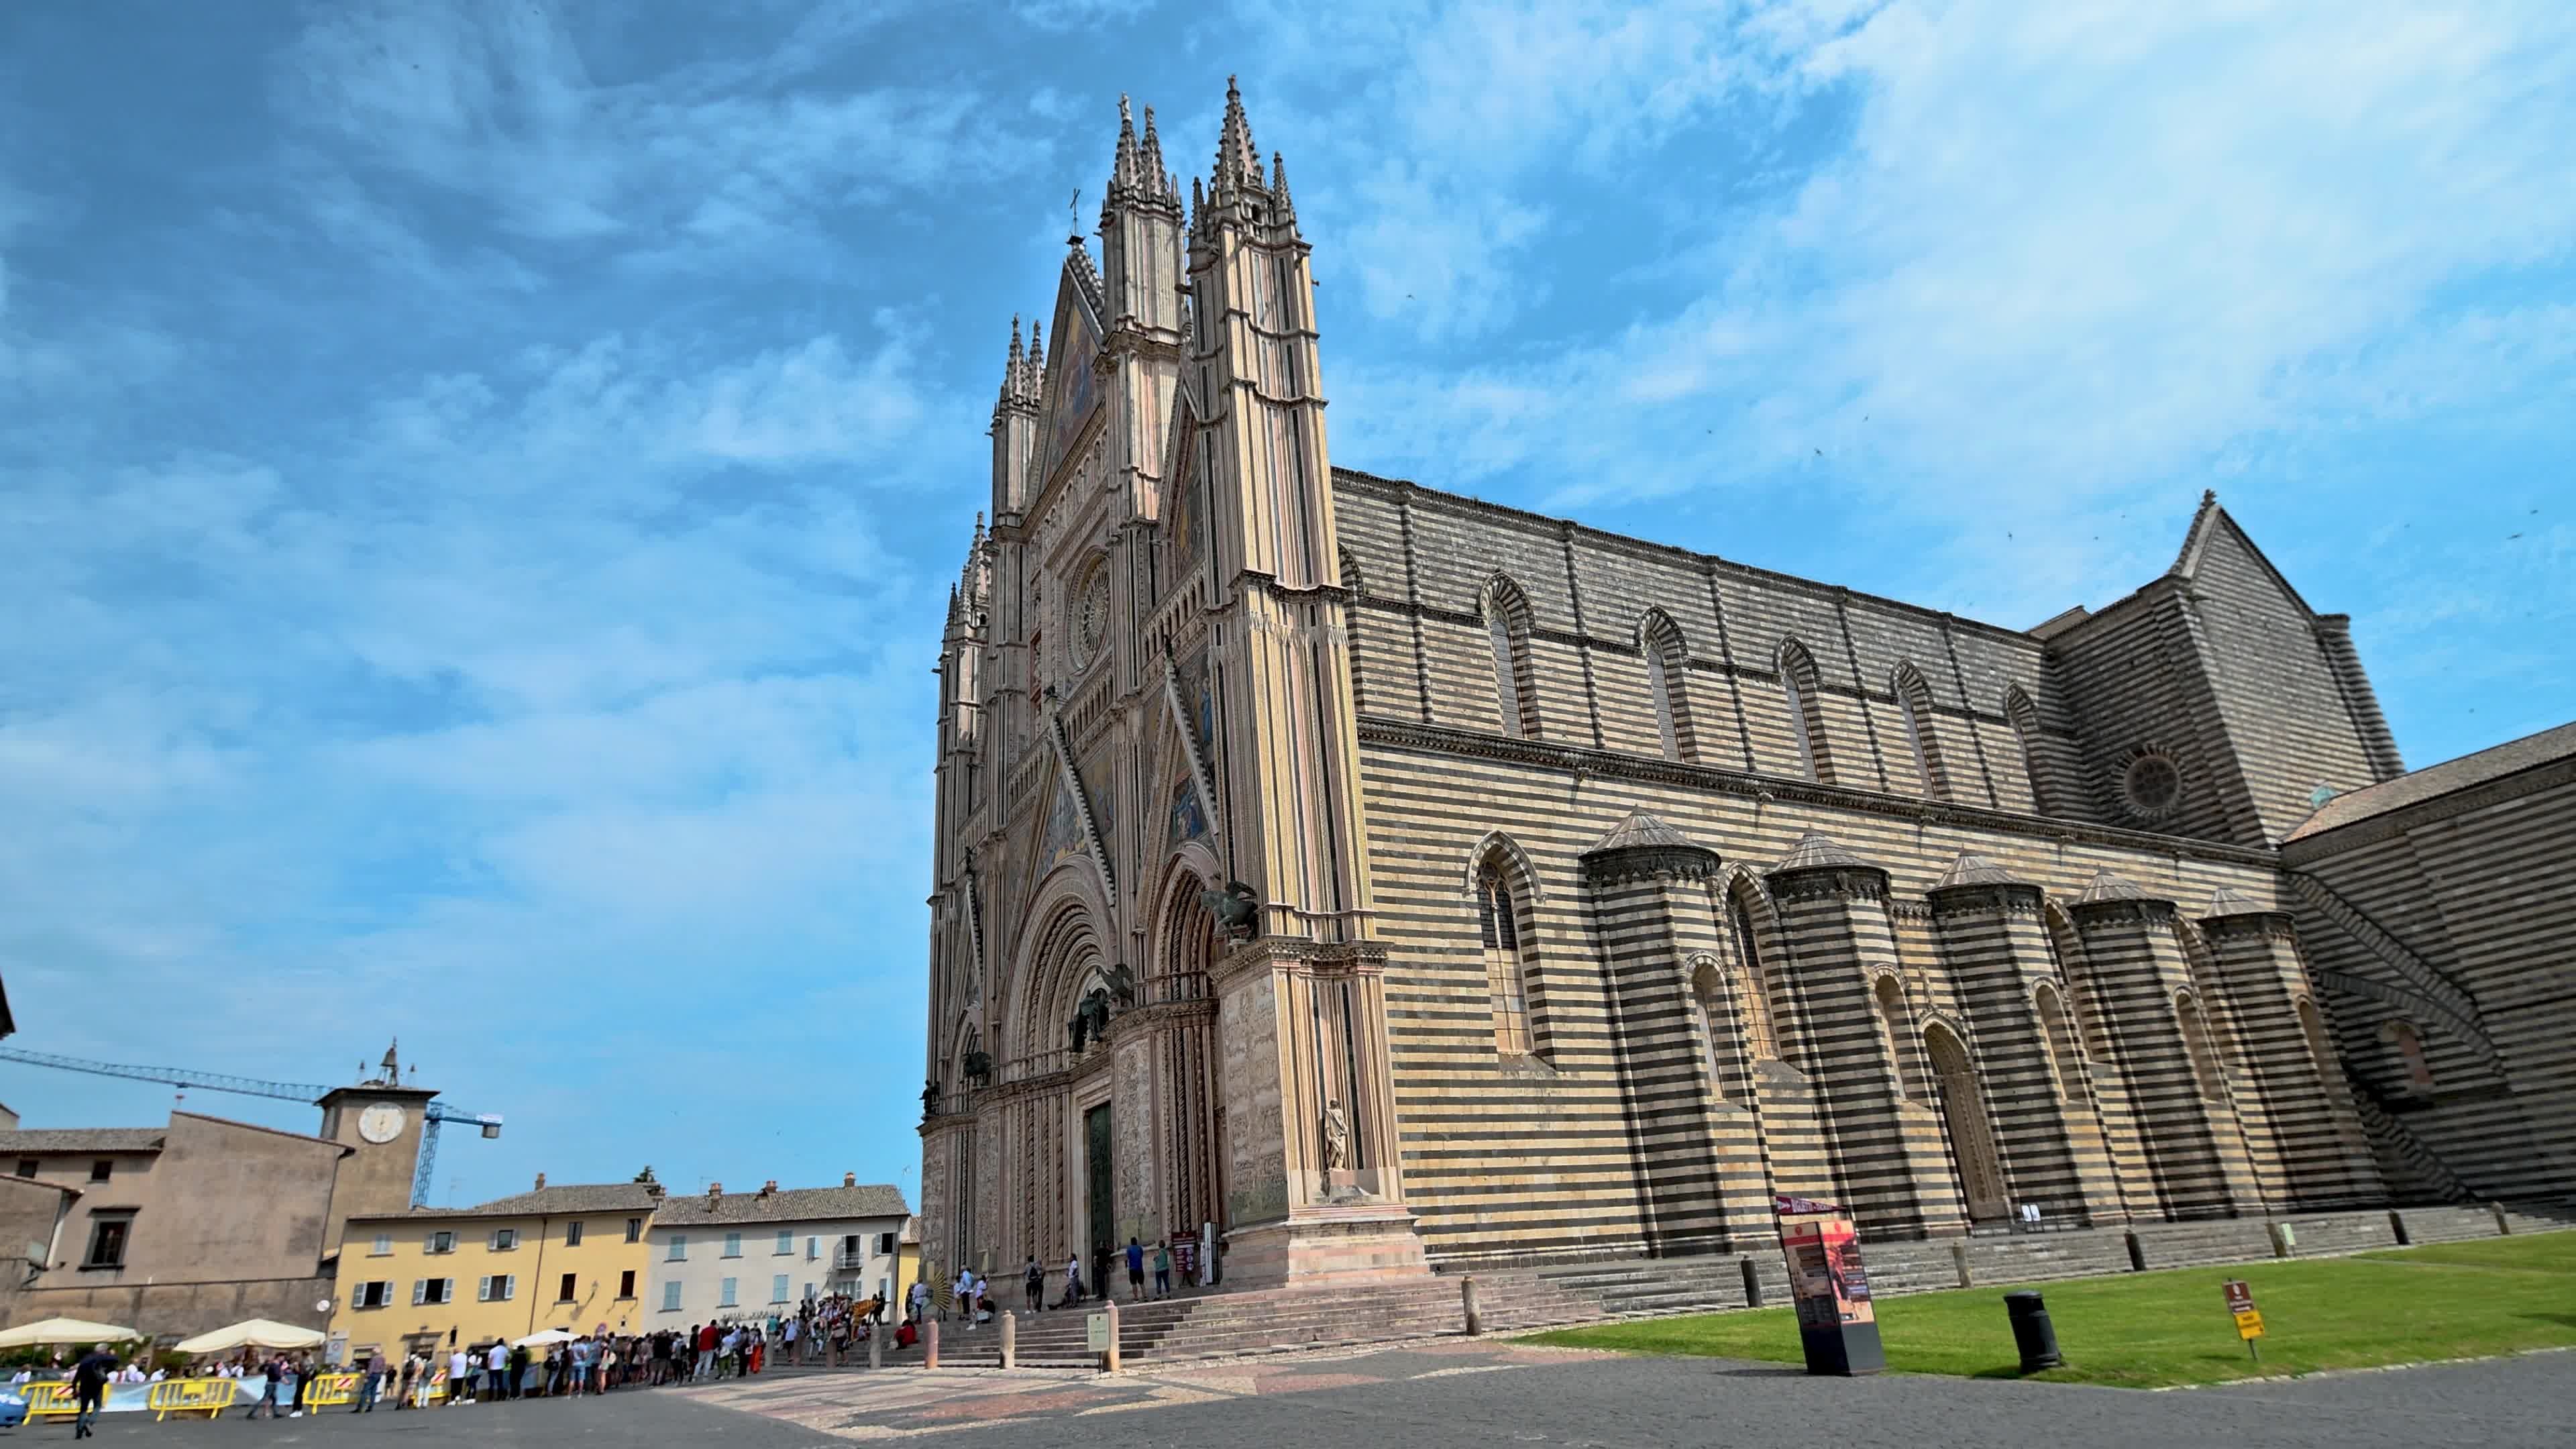 Cathedral: A large 14th-century Roman Catholic church dedicated to the Assumption of the Virgin Mary, Orvieto, Italy. 3840x2160 4K Wallpaper.